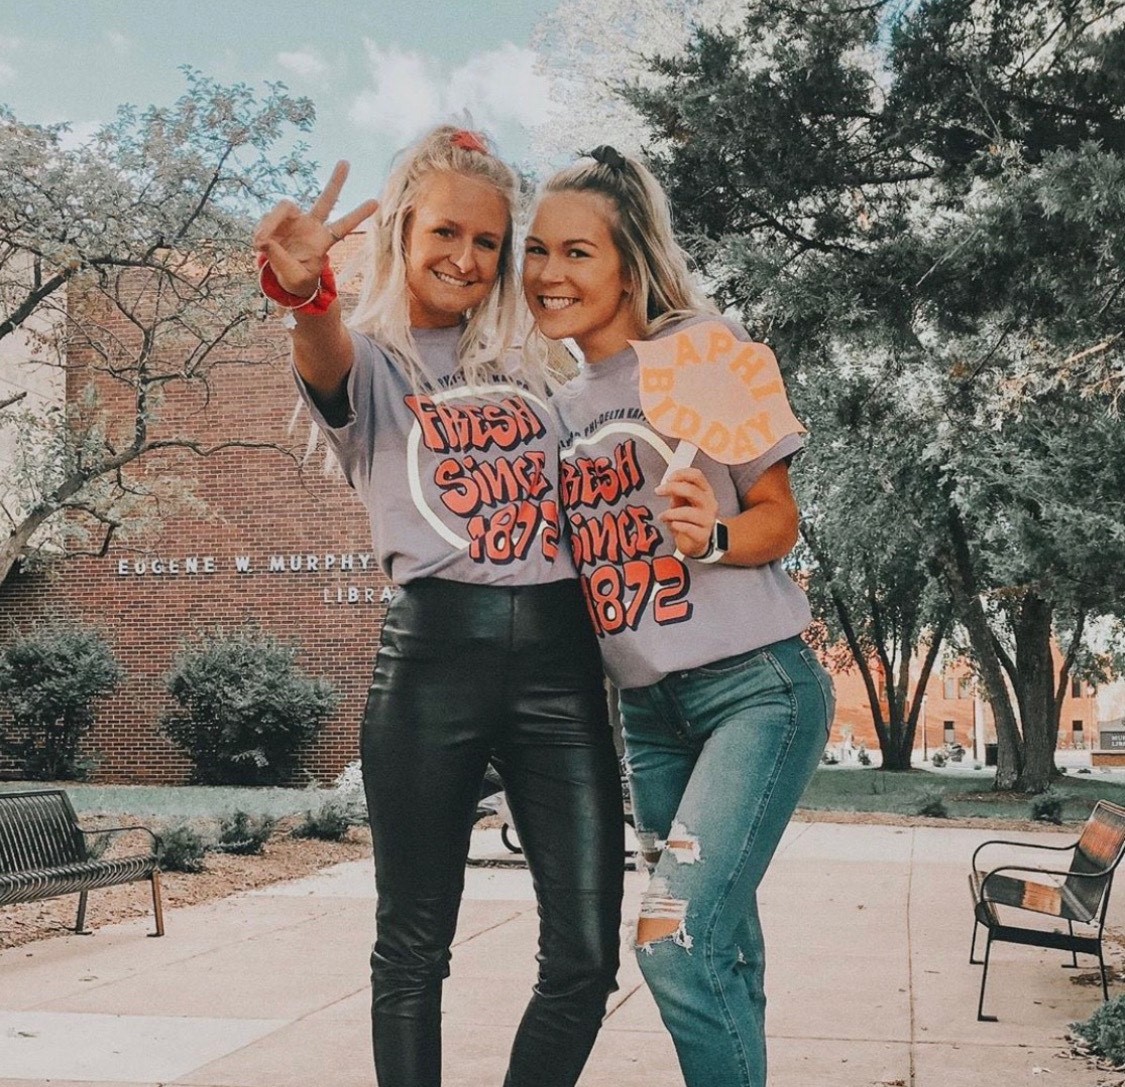 Two Alpha Phi members pose for a photograph during their Bid Day Celebration.